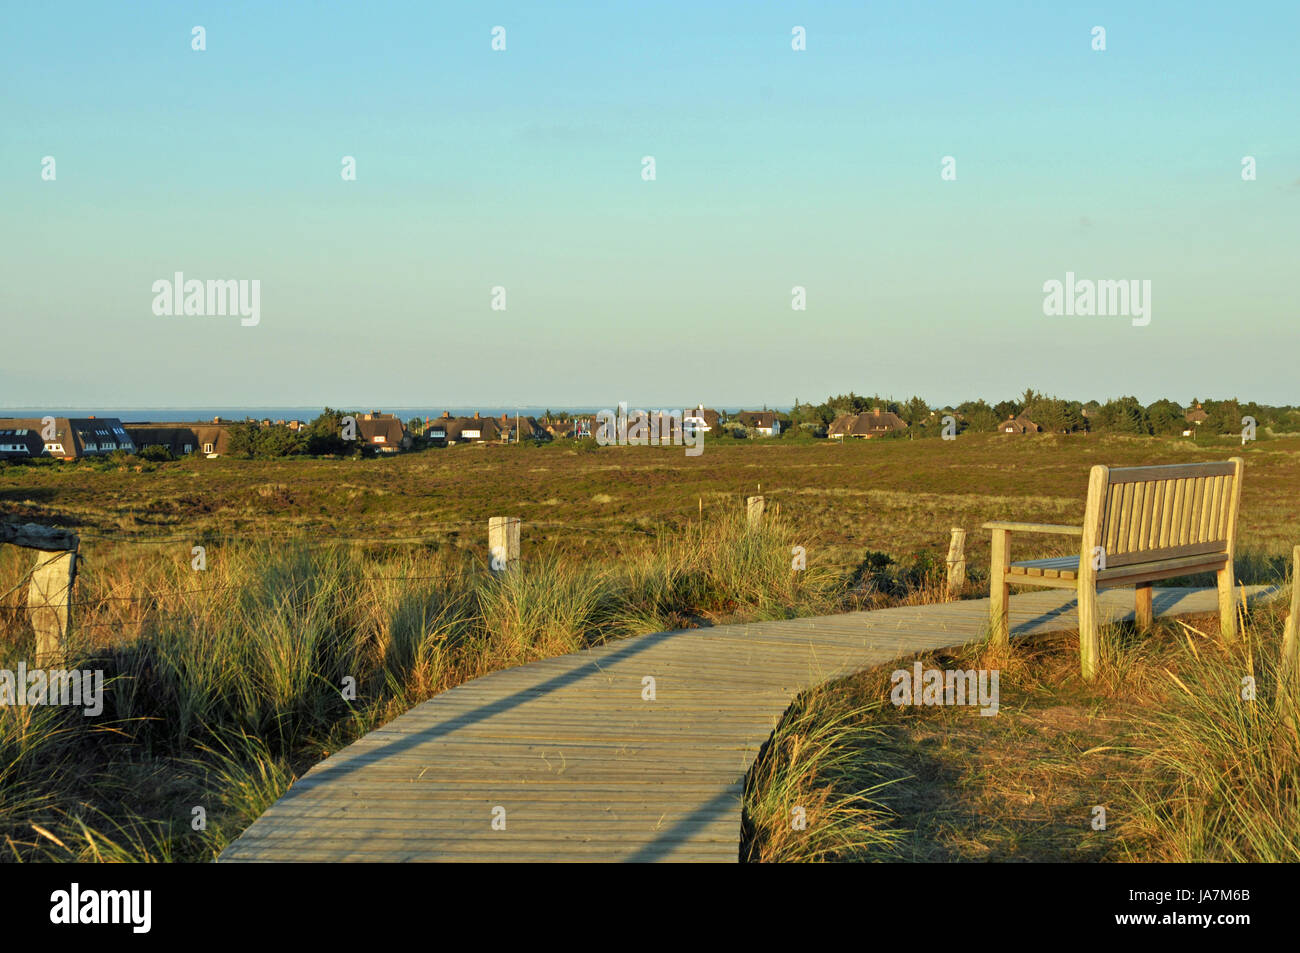 sylt, camping, seat, bench, scenery, countryside, nature, isle, island, blue, Stock Photo